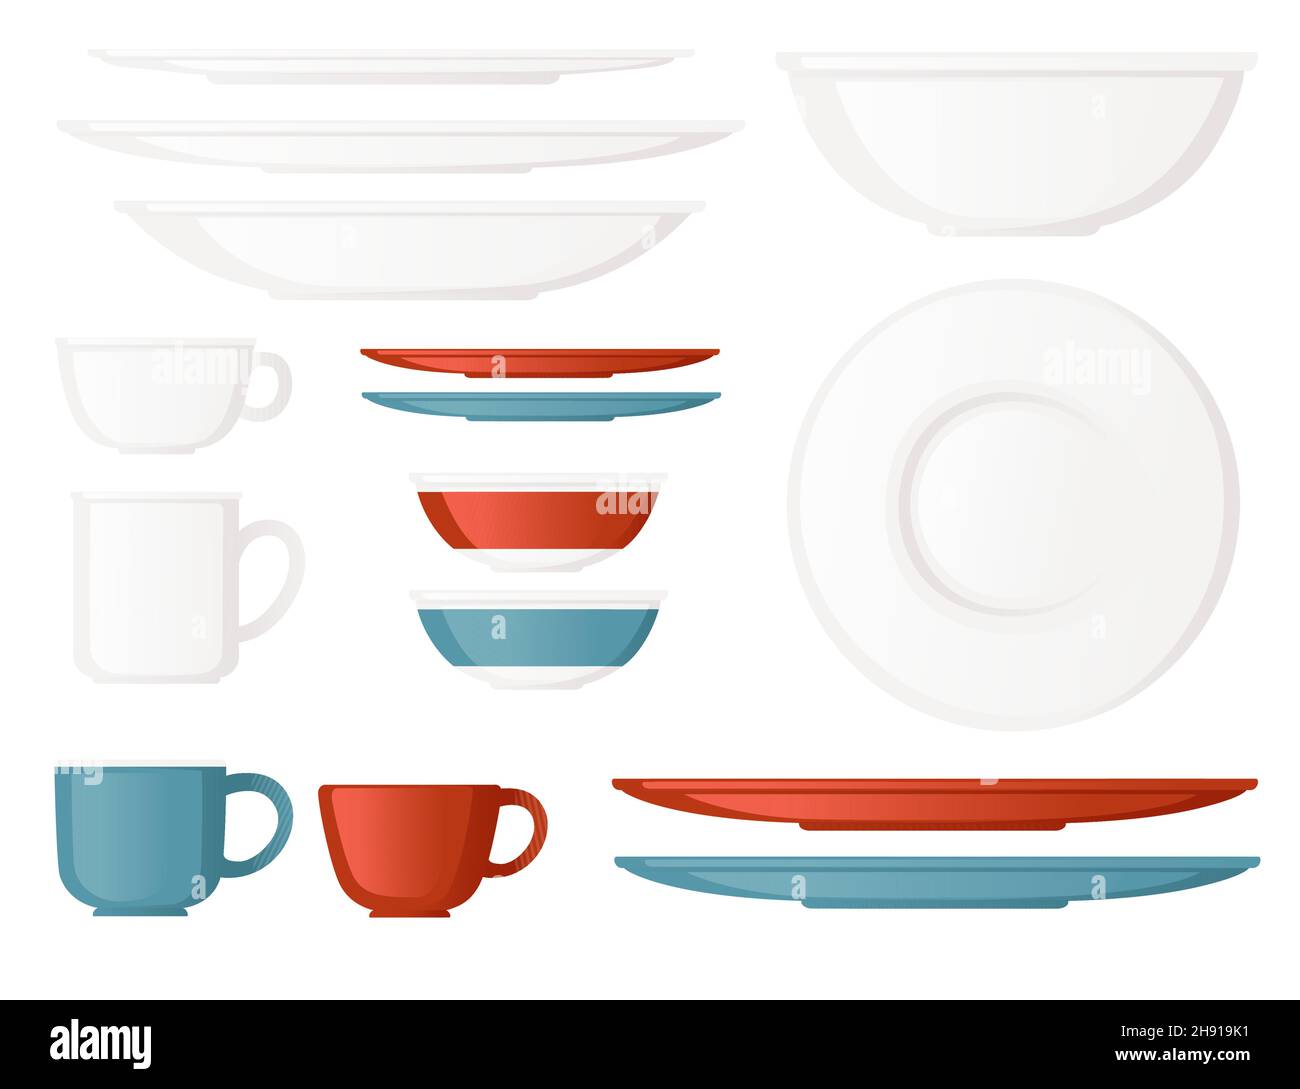 Clean kitchen dishware set with mugs plates saucers vector illustration on white background Stock Vector